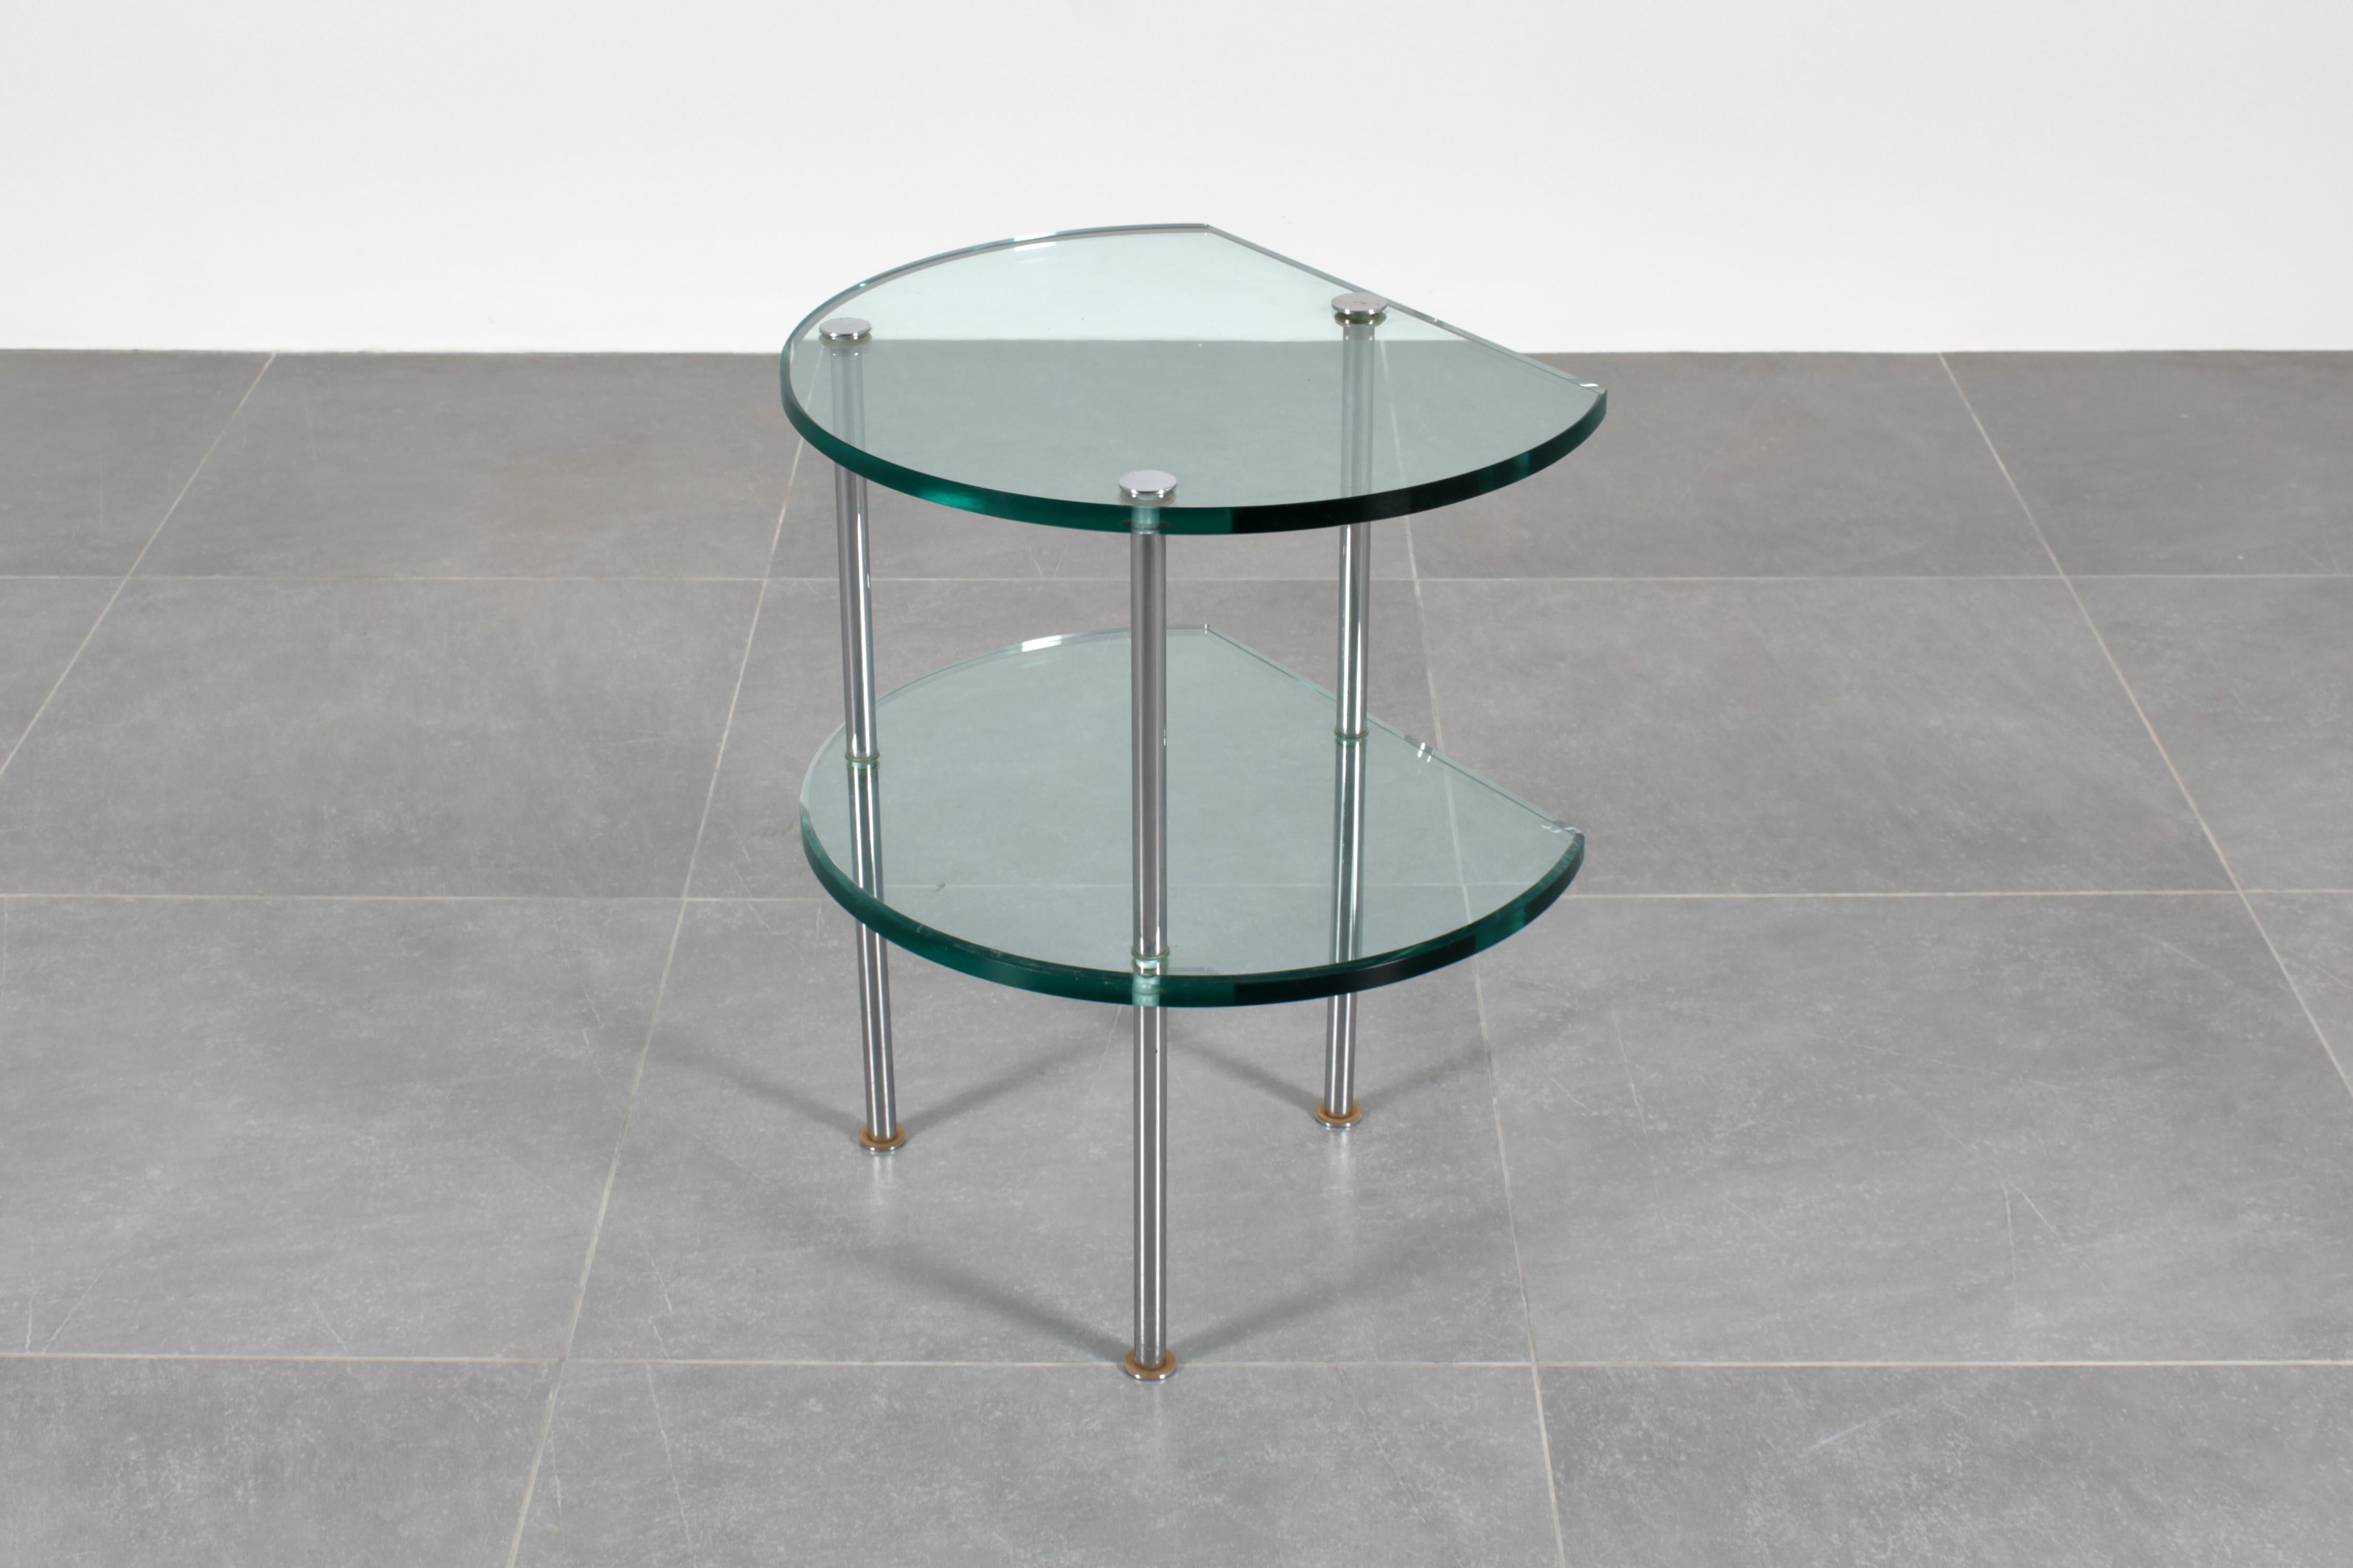 Stylish coffee table with double semi-circular shelf in thick Nile green glass with three tubular chromed steel legs. In the style of Gallotti & Radice, Italian creation in the 60s.
Wear consistent with age and use.